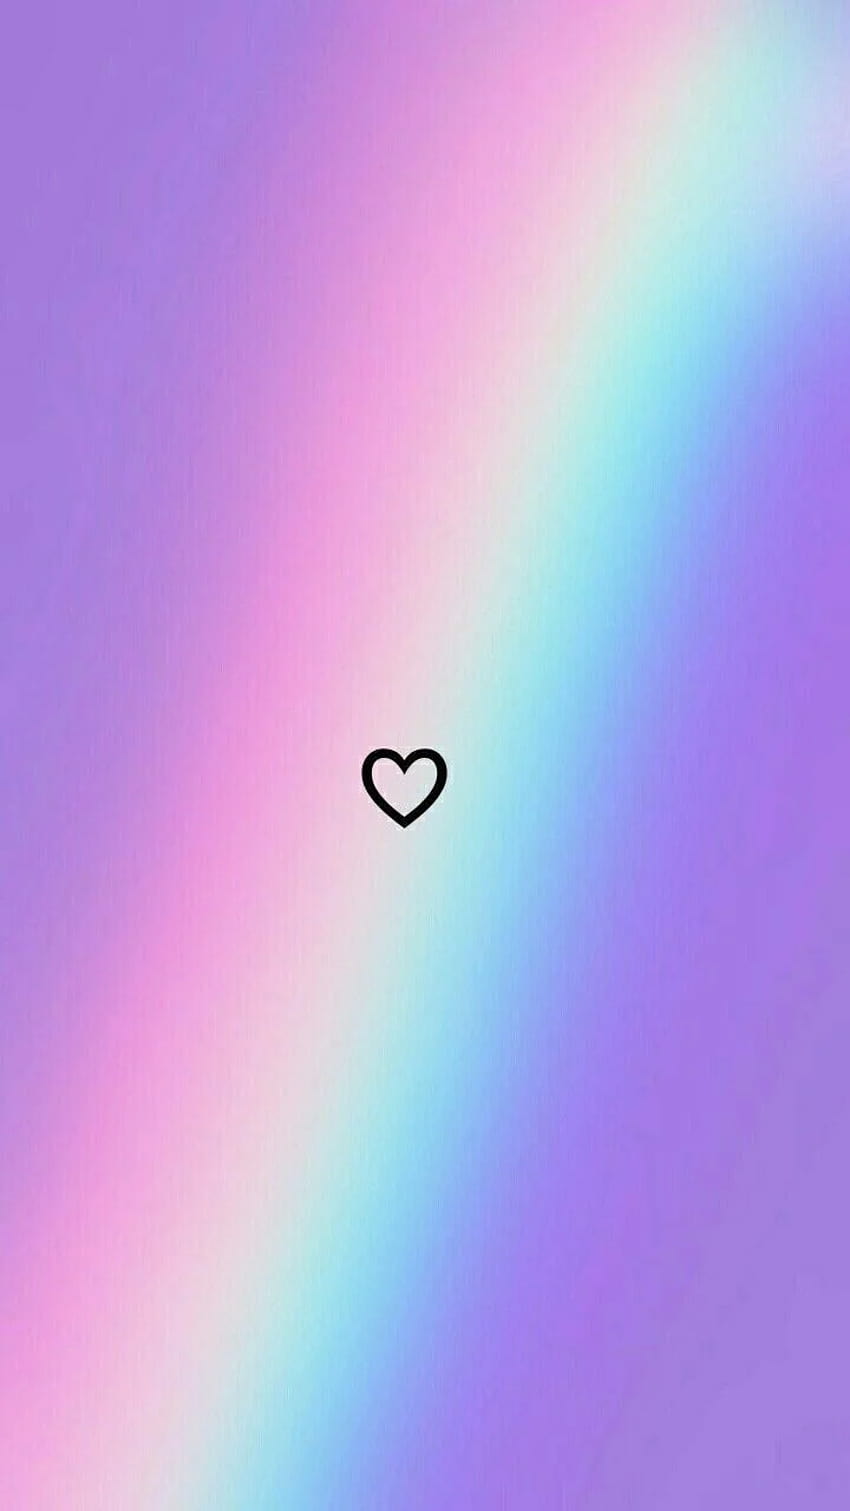 about cute in I love it by Caro♦️, aesthetic rainbow HD phone wallpaper